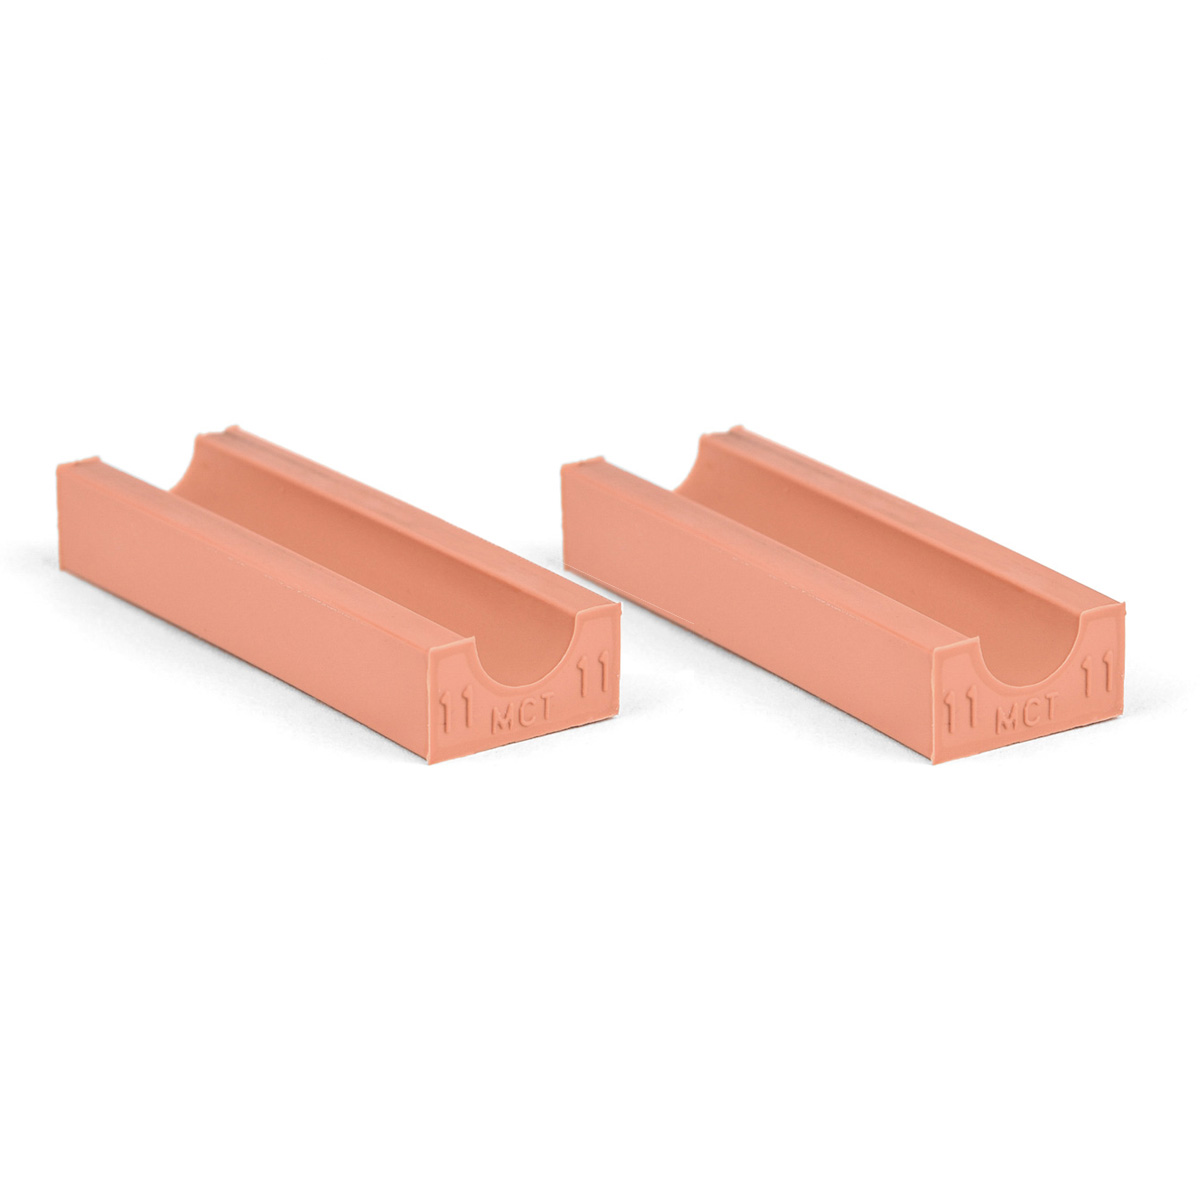 20-11*2 Set of 2 half insert block lycron 30mm, 20-11 for cable/pipe diam. 10.5-11.5mm